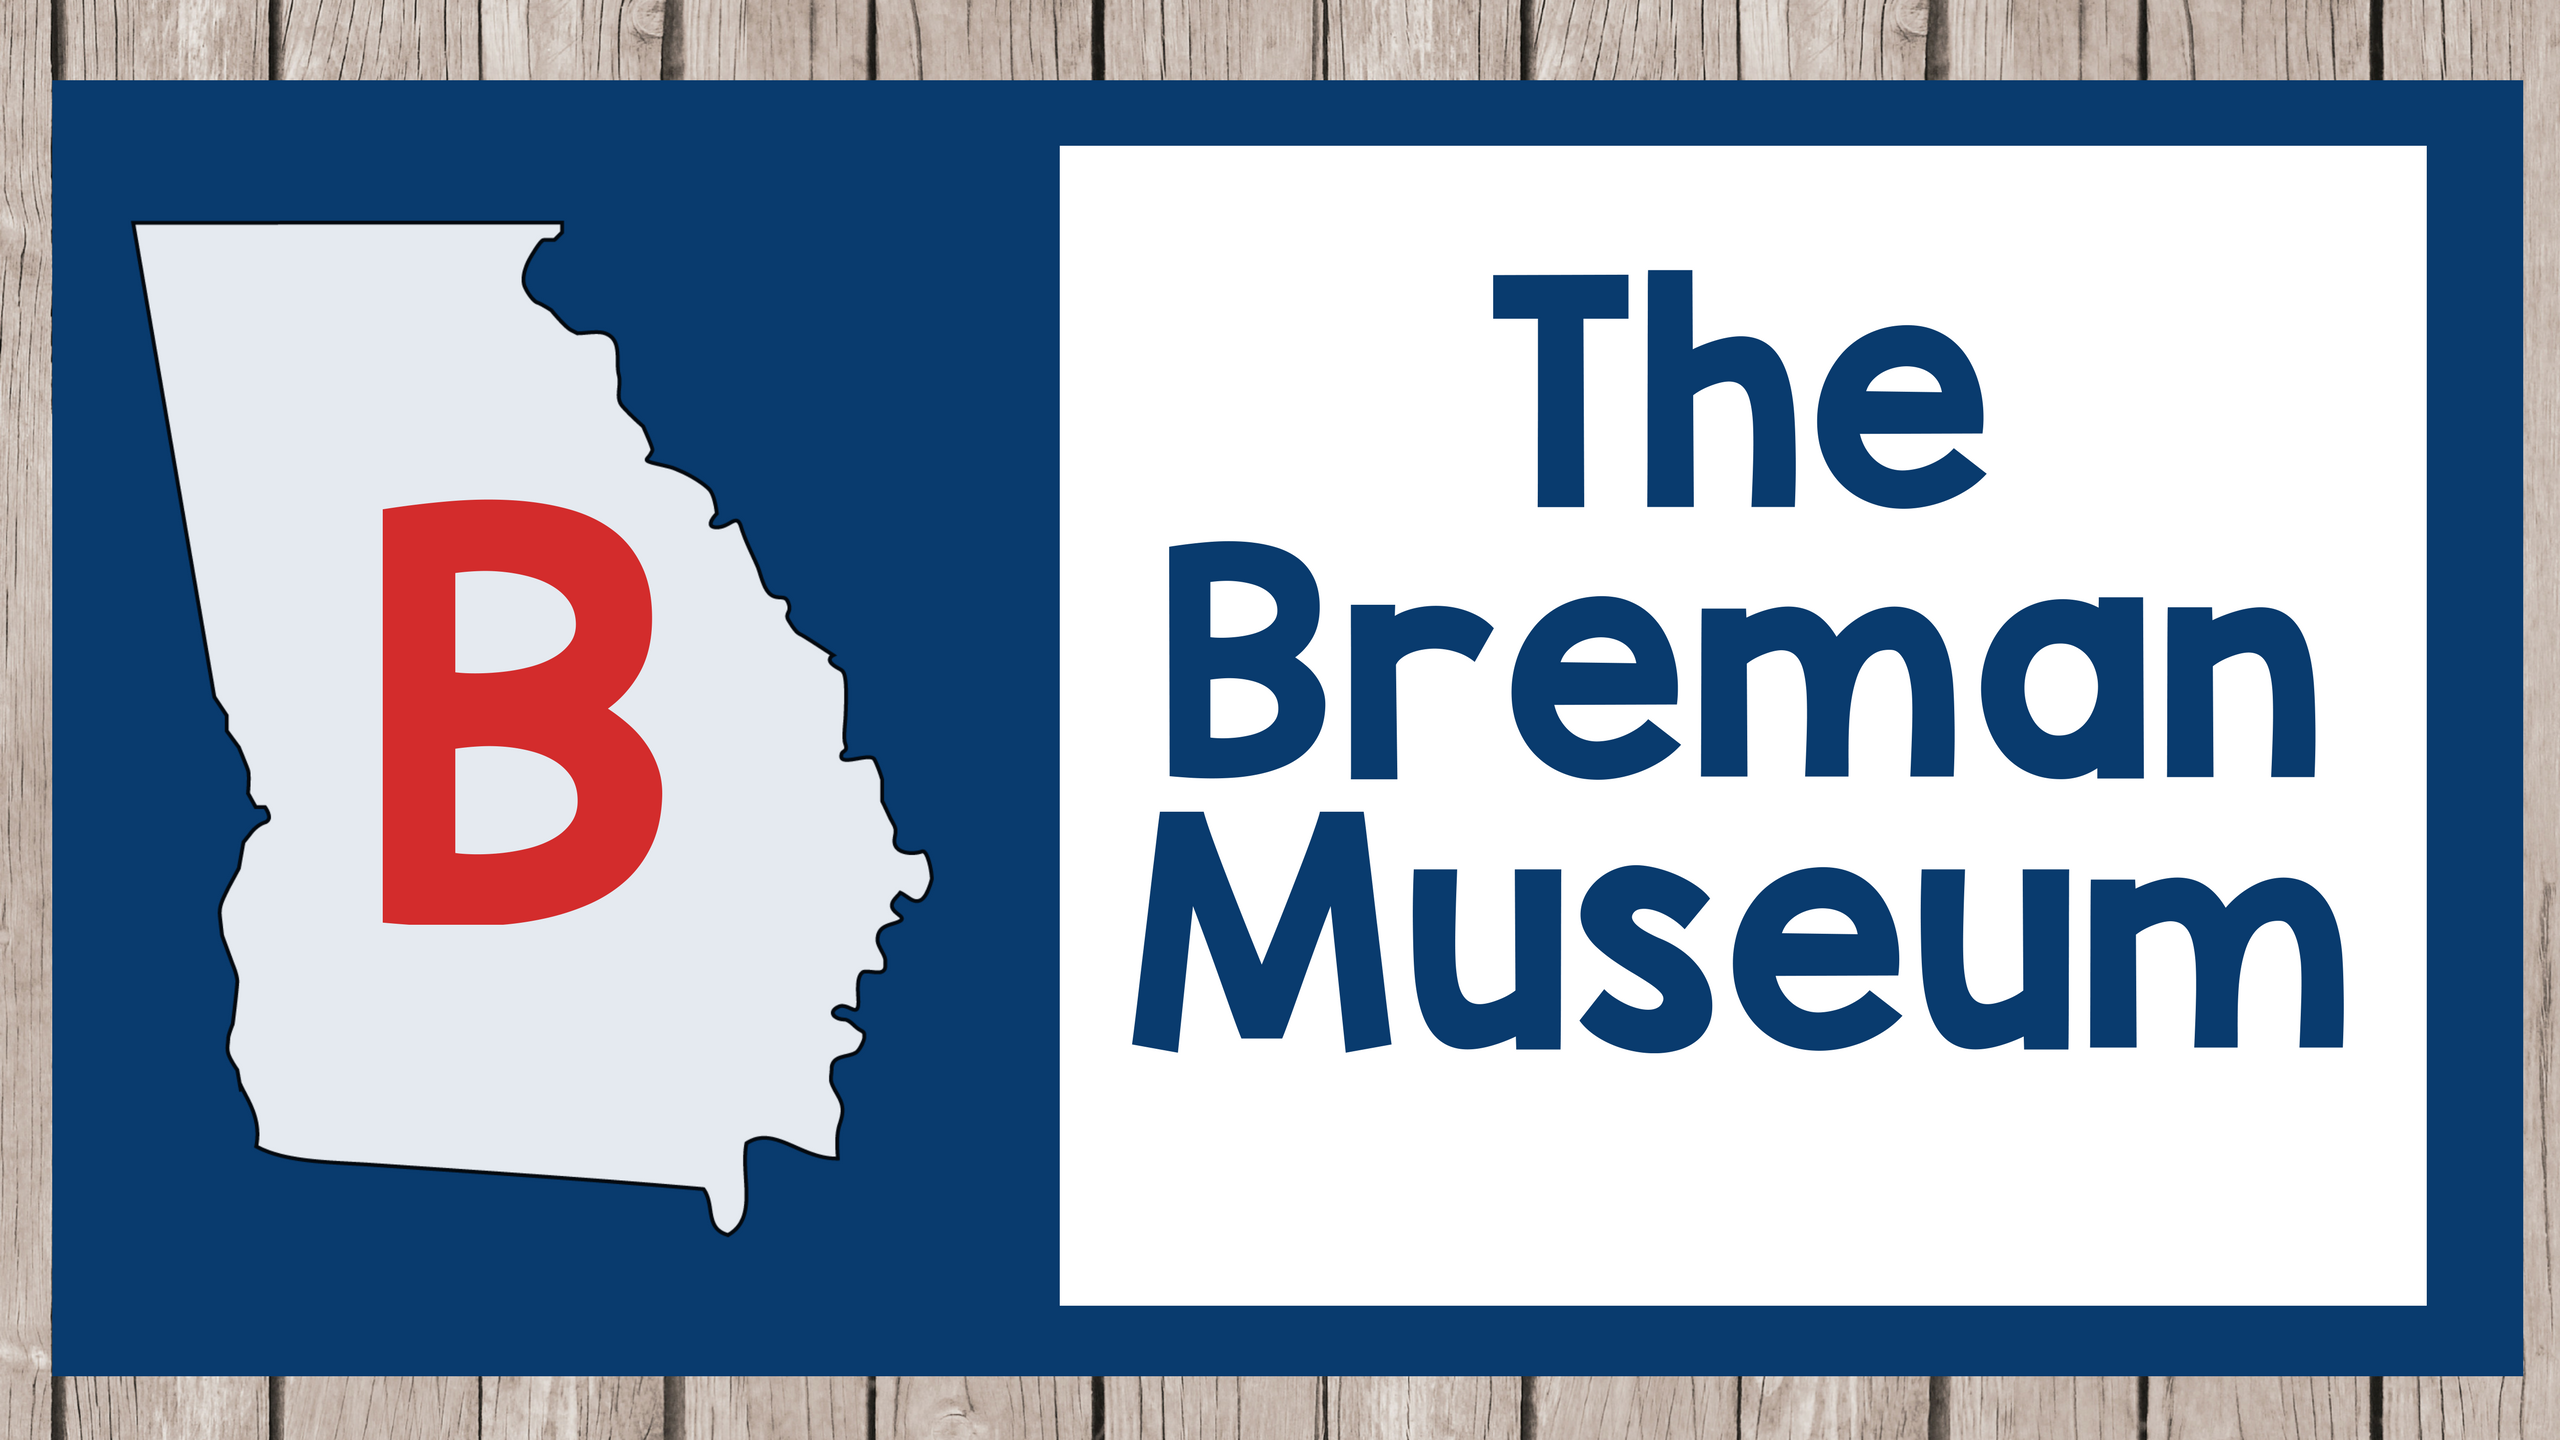 History-Related Destinations for Kids in the Southeast Part 1: The Breman Museum